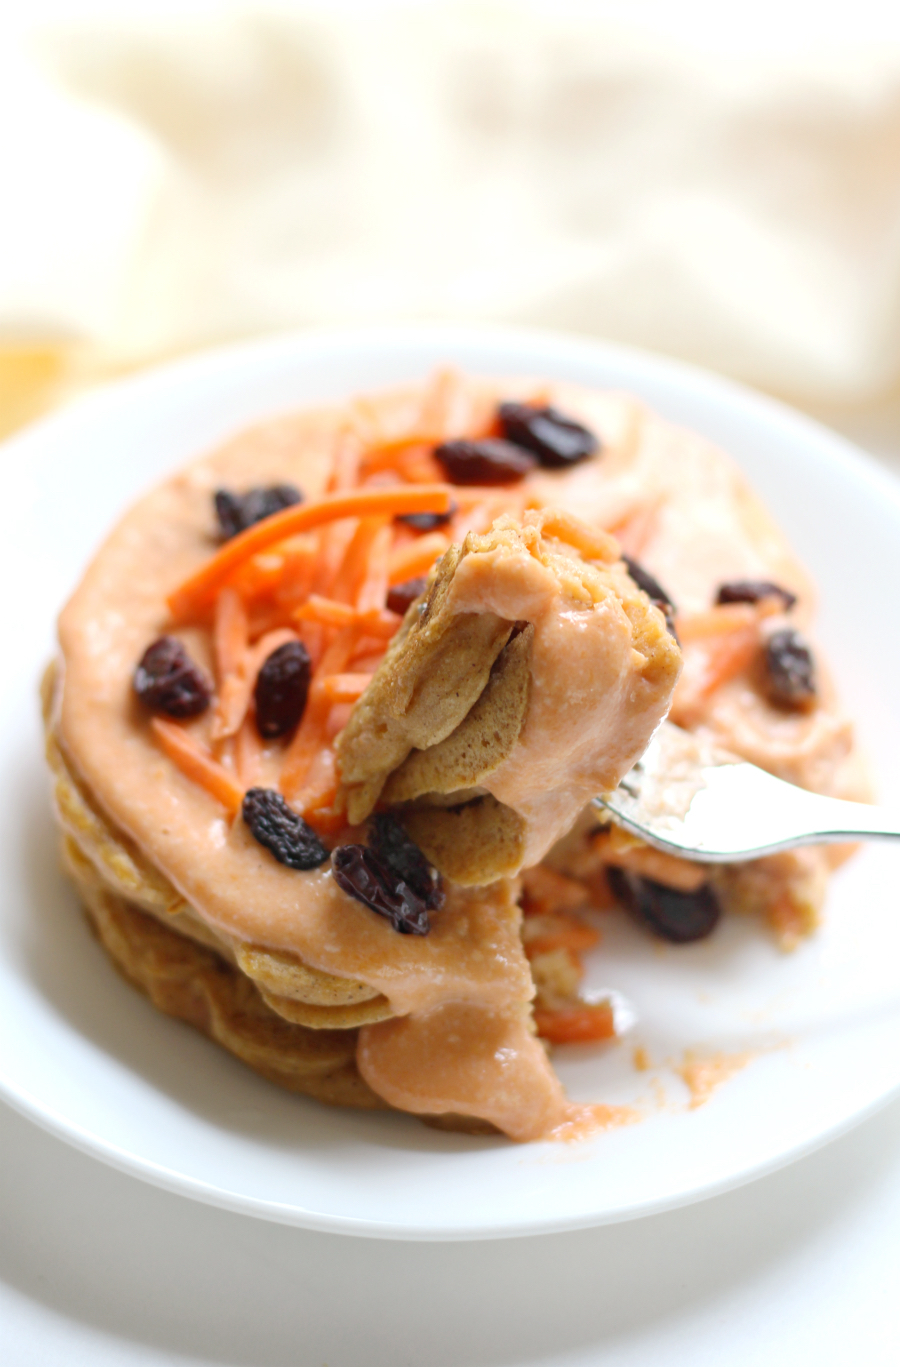 Carrot Cake Pancakes with Carrot Cream Frosting (Gluten-Free, Allergy-Free, Vegan) | Strength and Sunshine @RebeccaGF666 Everything you love about carrot cake, now as a healthy breakfast! These Carrot Cake Pancakes with Carrot Cream Frosting are gluten-free, allergy-free, vegan, and sneak in tons of veggie nutrition! This recipe is just what you need to welcome Spring!